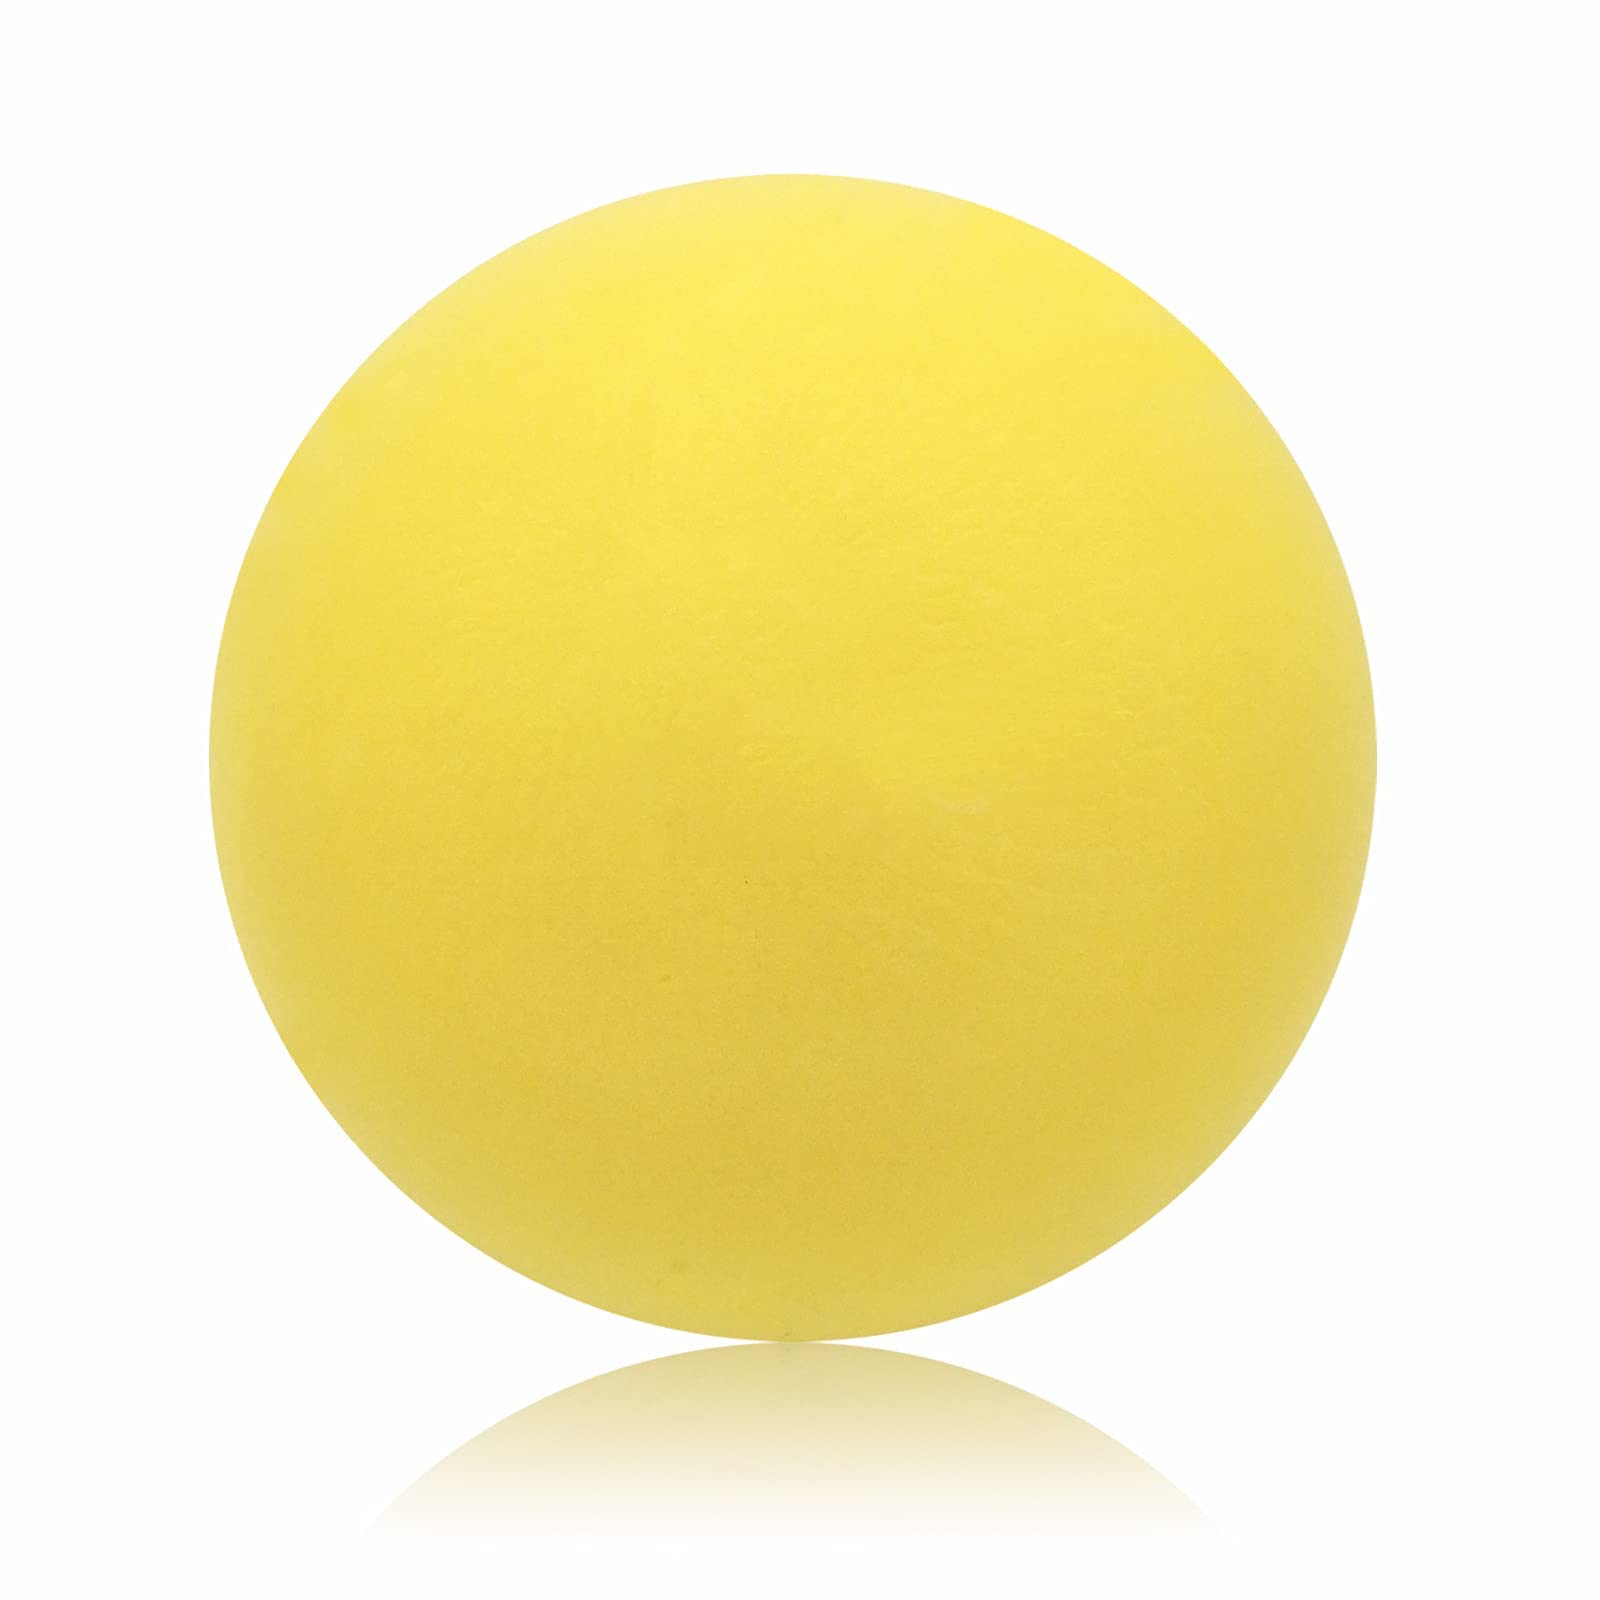 7-Inch Uncoated High Density Foam Ball - for Over 3 Years Old Kids Foam Sports Balls - Soft and Bouncy, Lightweight and Easy to Grasp Foam Silent Balls are Safe for Younger Children